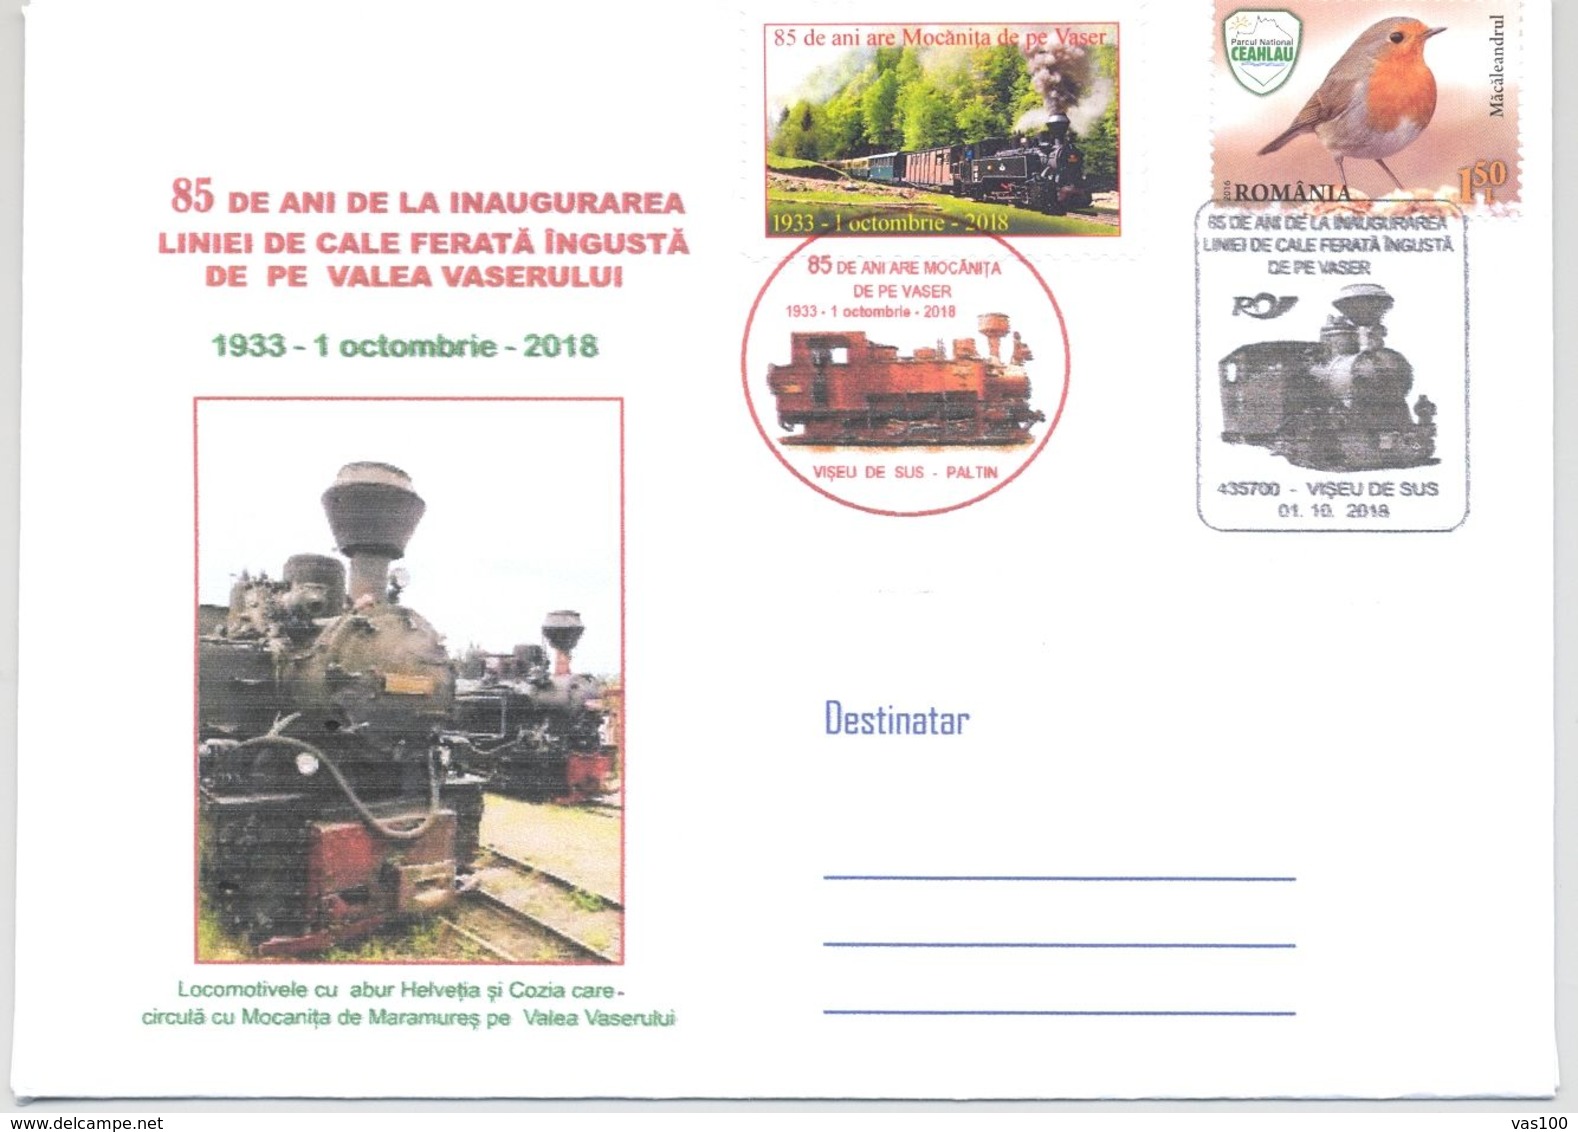 TRANSPORTS, TRAINS, LOCOMOTIVE, NARROW RAILWAYS IN MARAMURES, SPECIAL COVER, 2018, ROMANIA - Trains